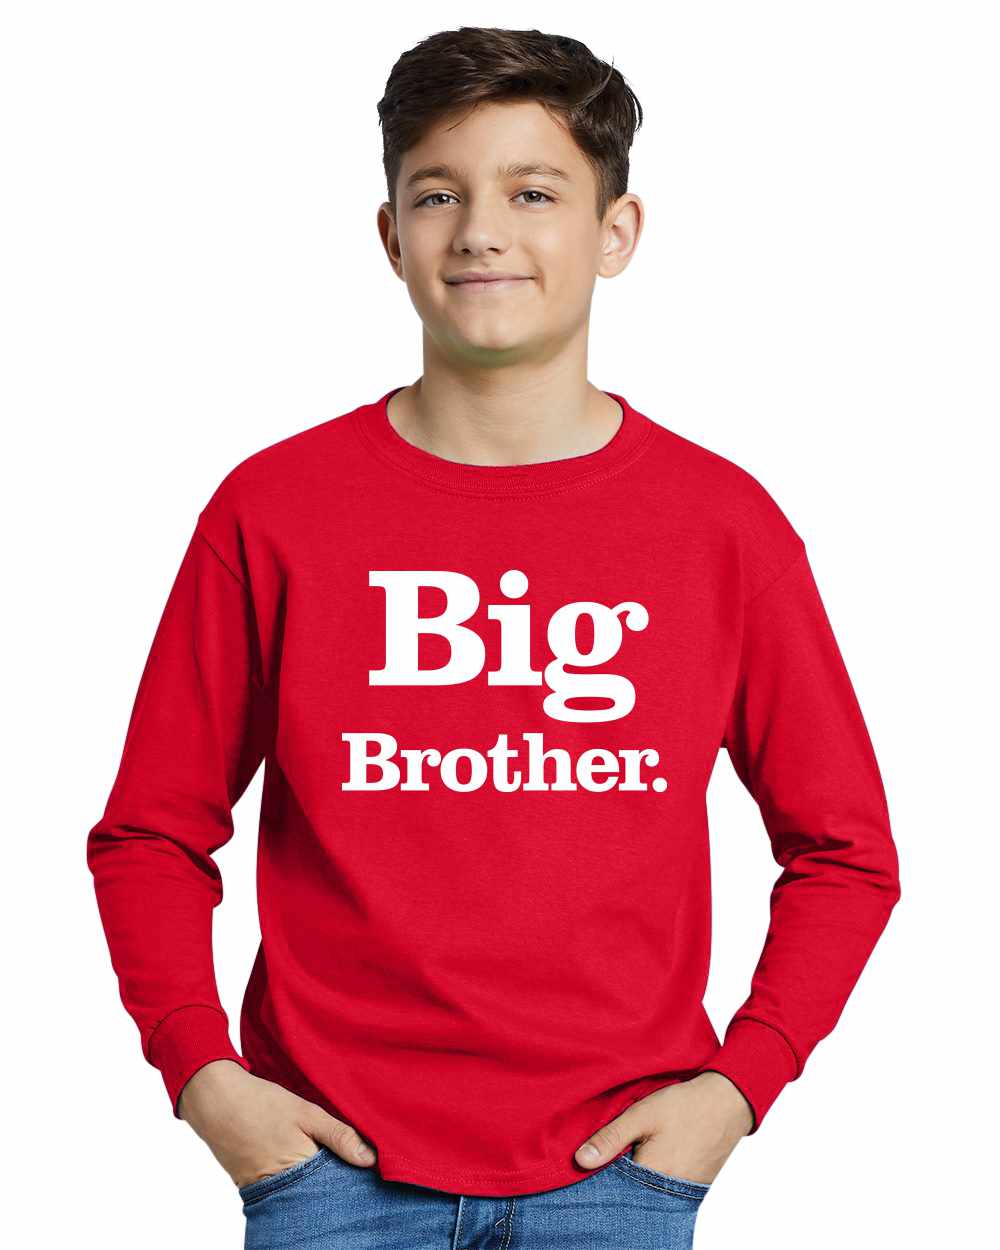 Big Brother (period) on Youth Long Sleeve Shirt (#976-203)